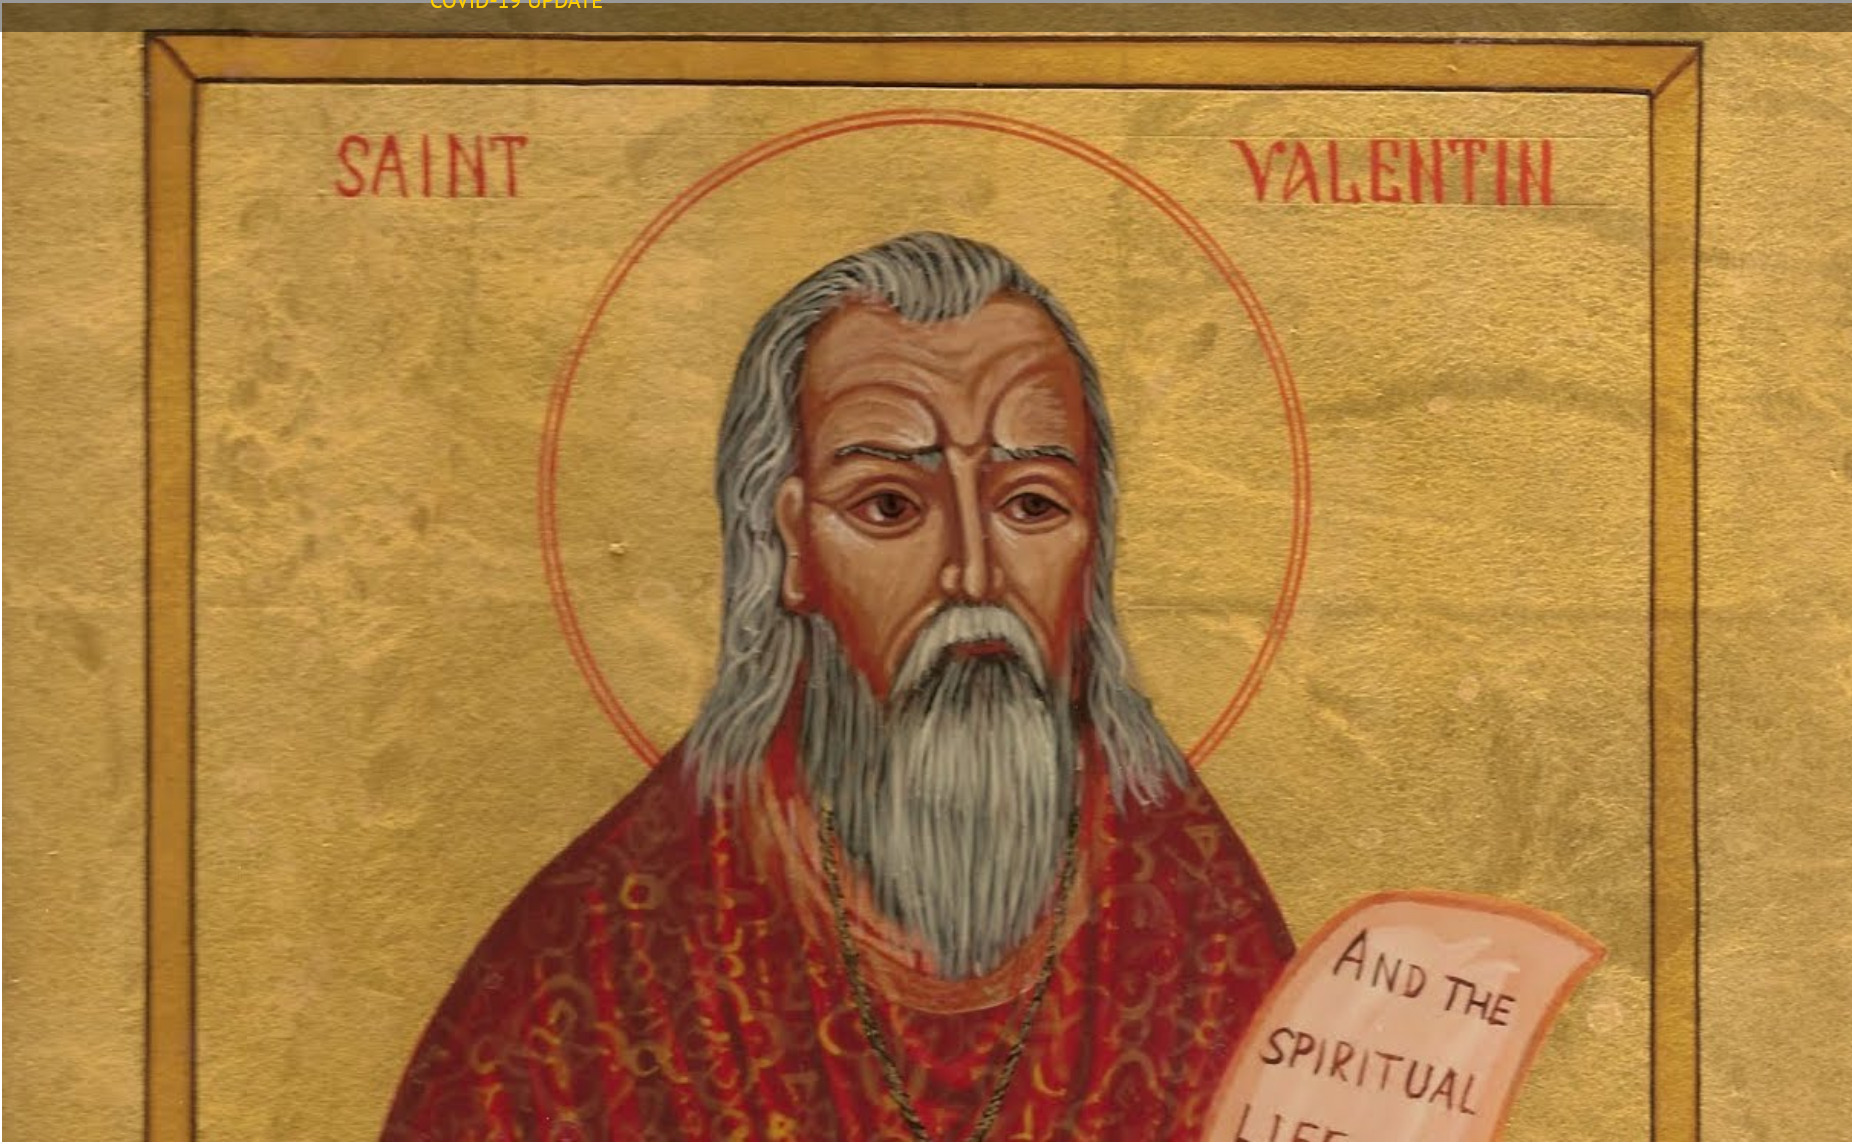 A medieval depiction of Saint Valentine. A man with a grey beard and grey hair in a red robe